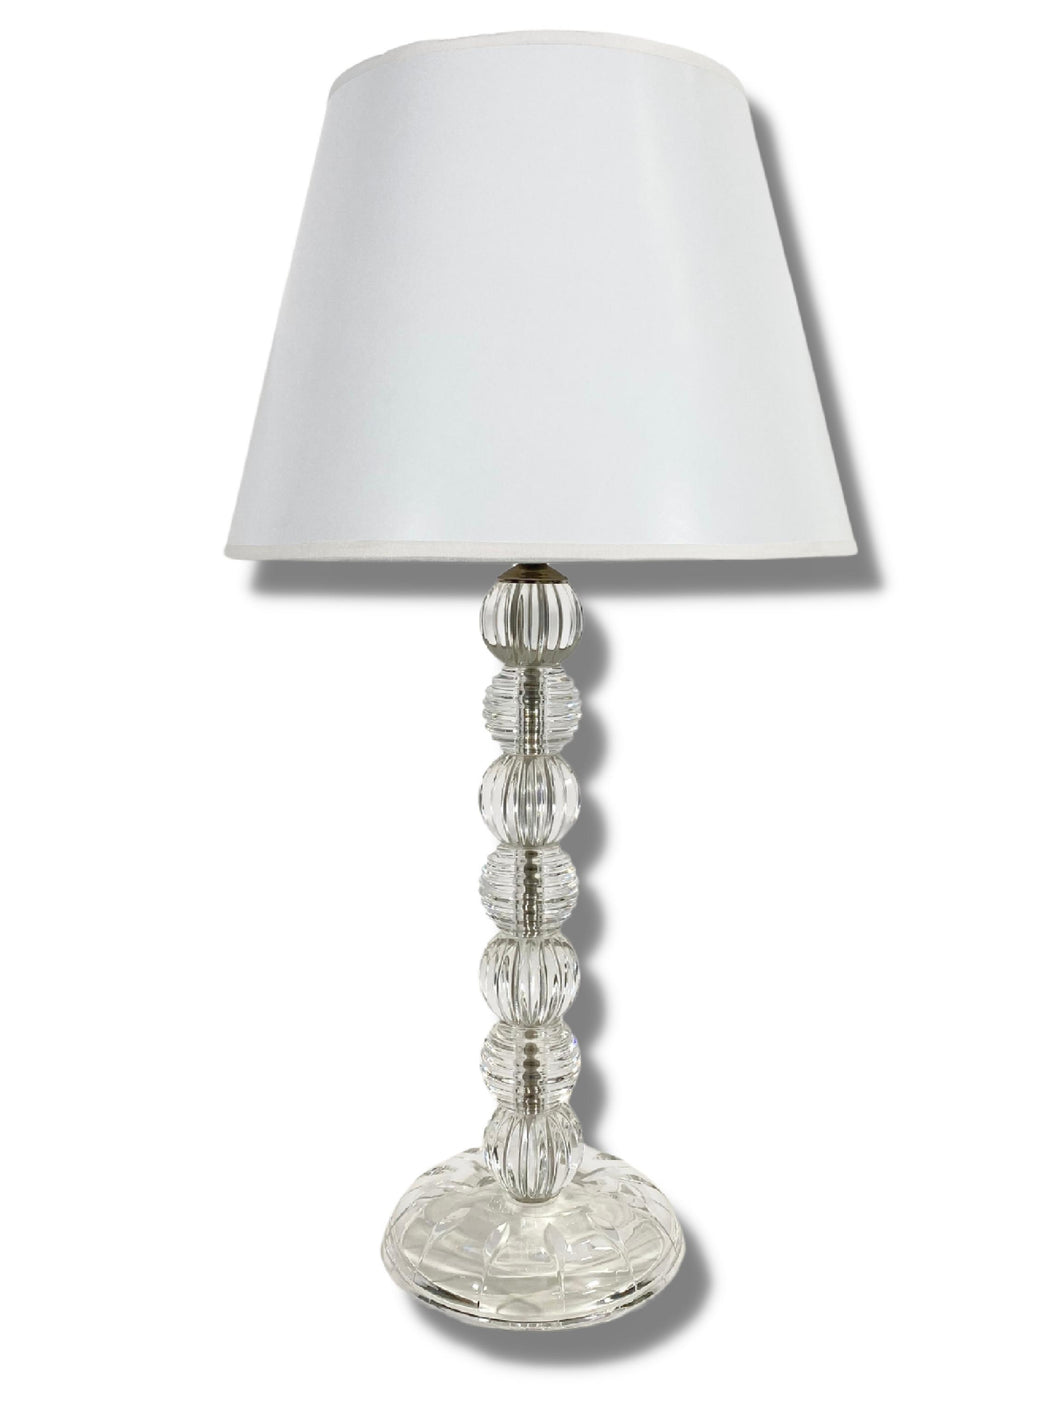 Deco-Style Crystal Lamp